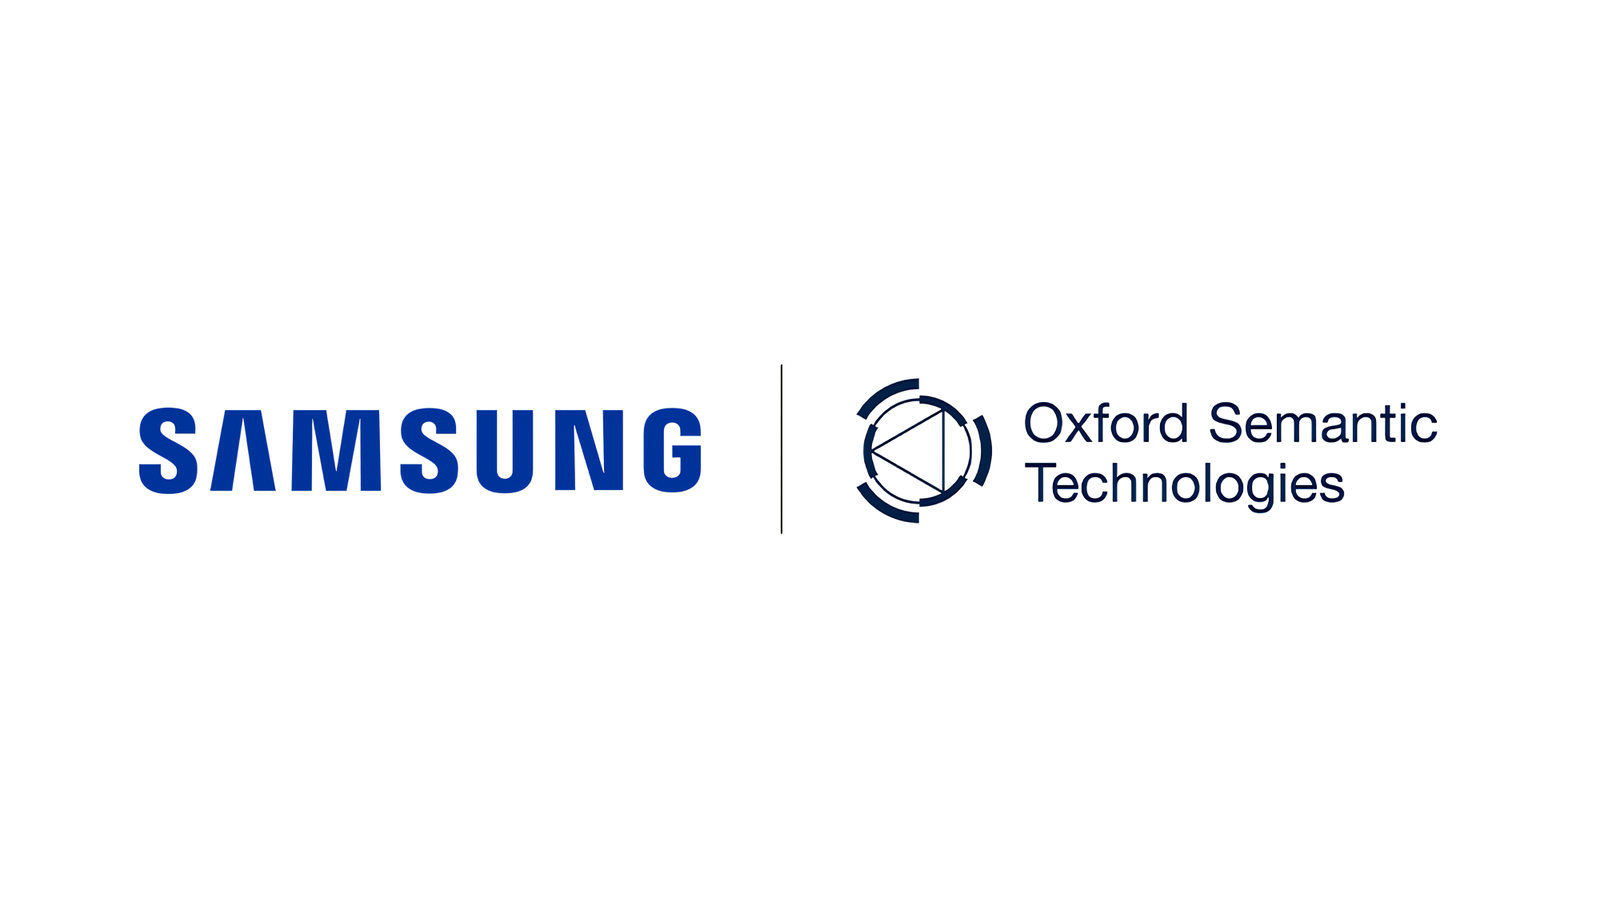 Samsung has acquired UK startup Oxford Semantic Technologies to improve and expand Galaxy AI